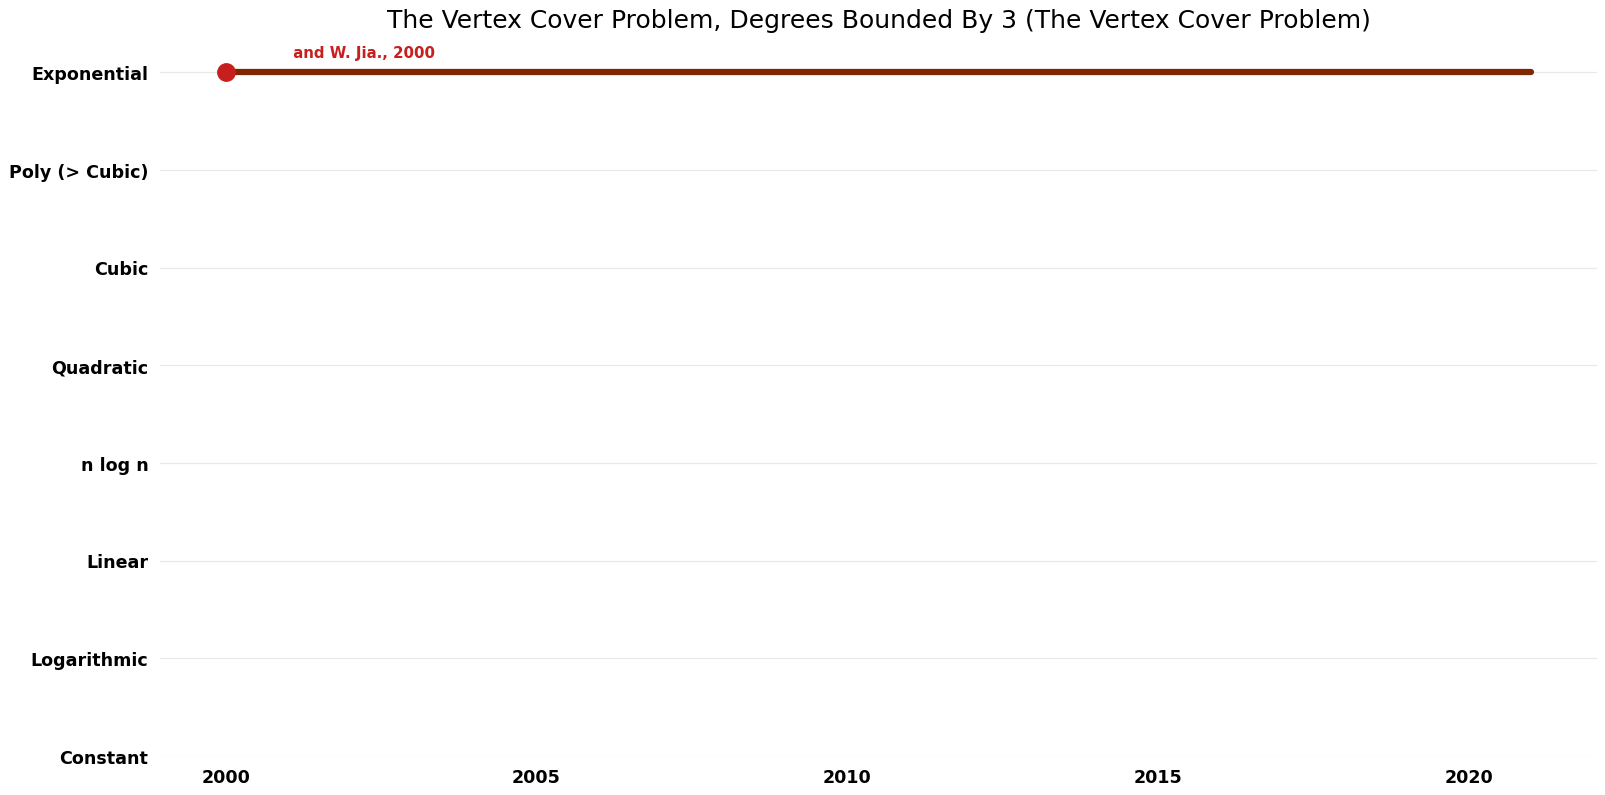 File:The Vertex Cover Problem - The Vertex Cover Problem, Degrees Bounded By 3 - Time.png